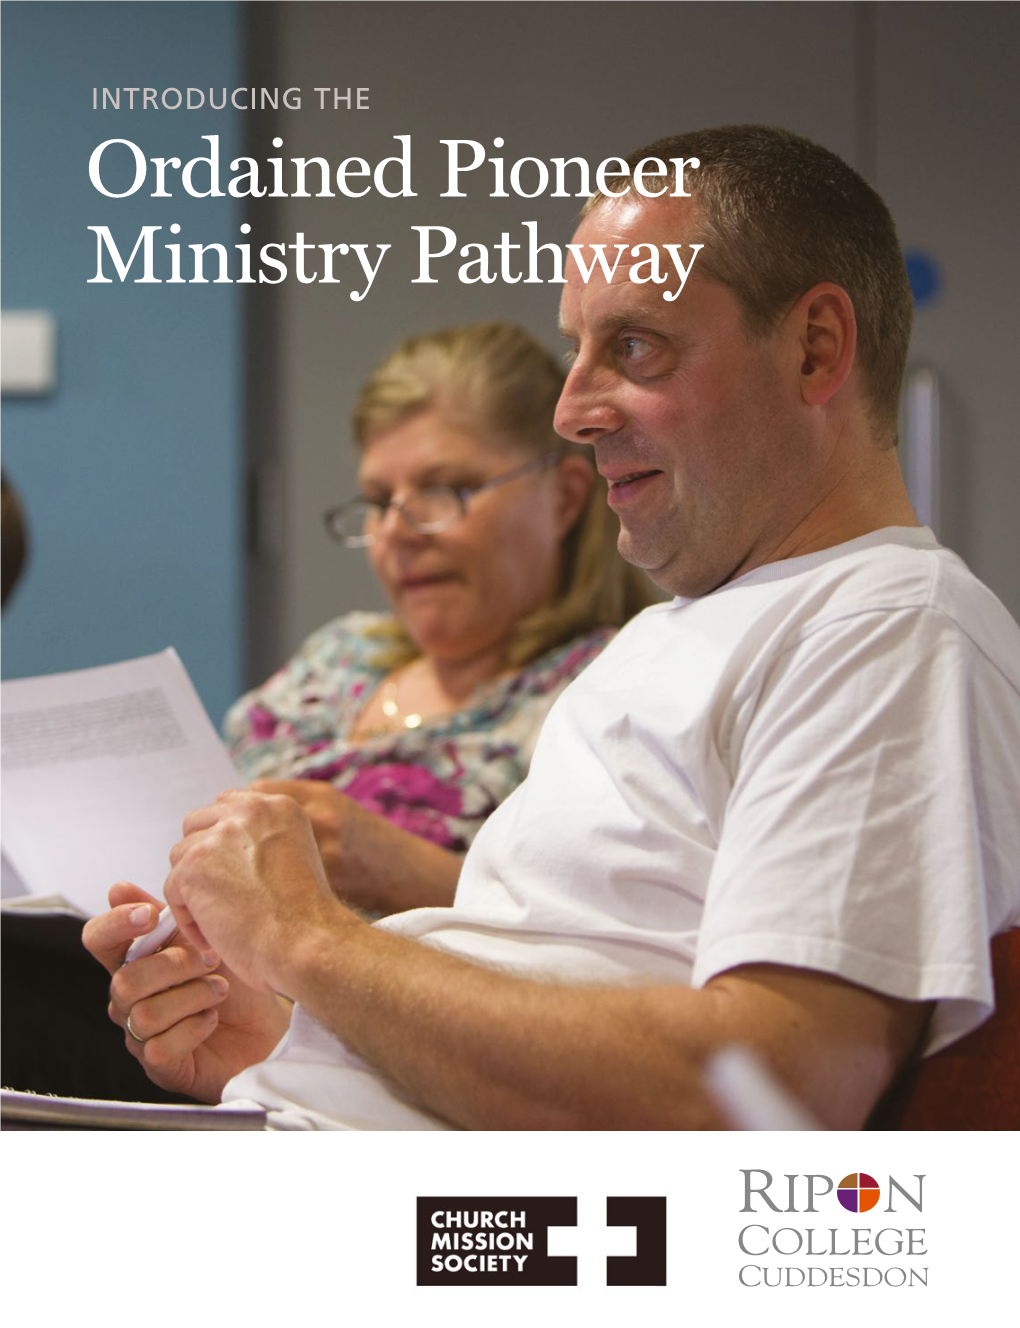 Ordained Pioneer Ministry Pathway Ripon College Cuddesdon and Spirituality and Discipleship, Pastoral Church Mission Society (CMS), Each Care and Ethics